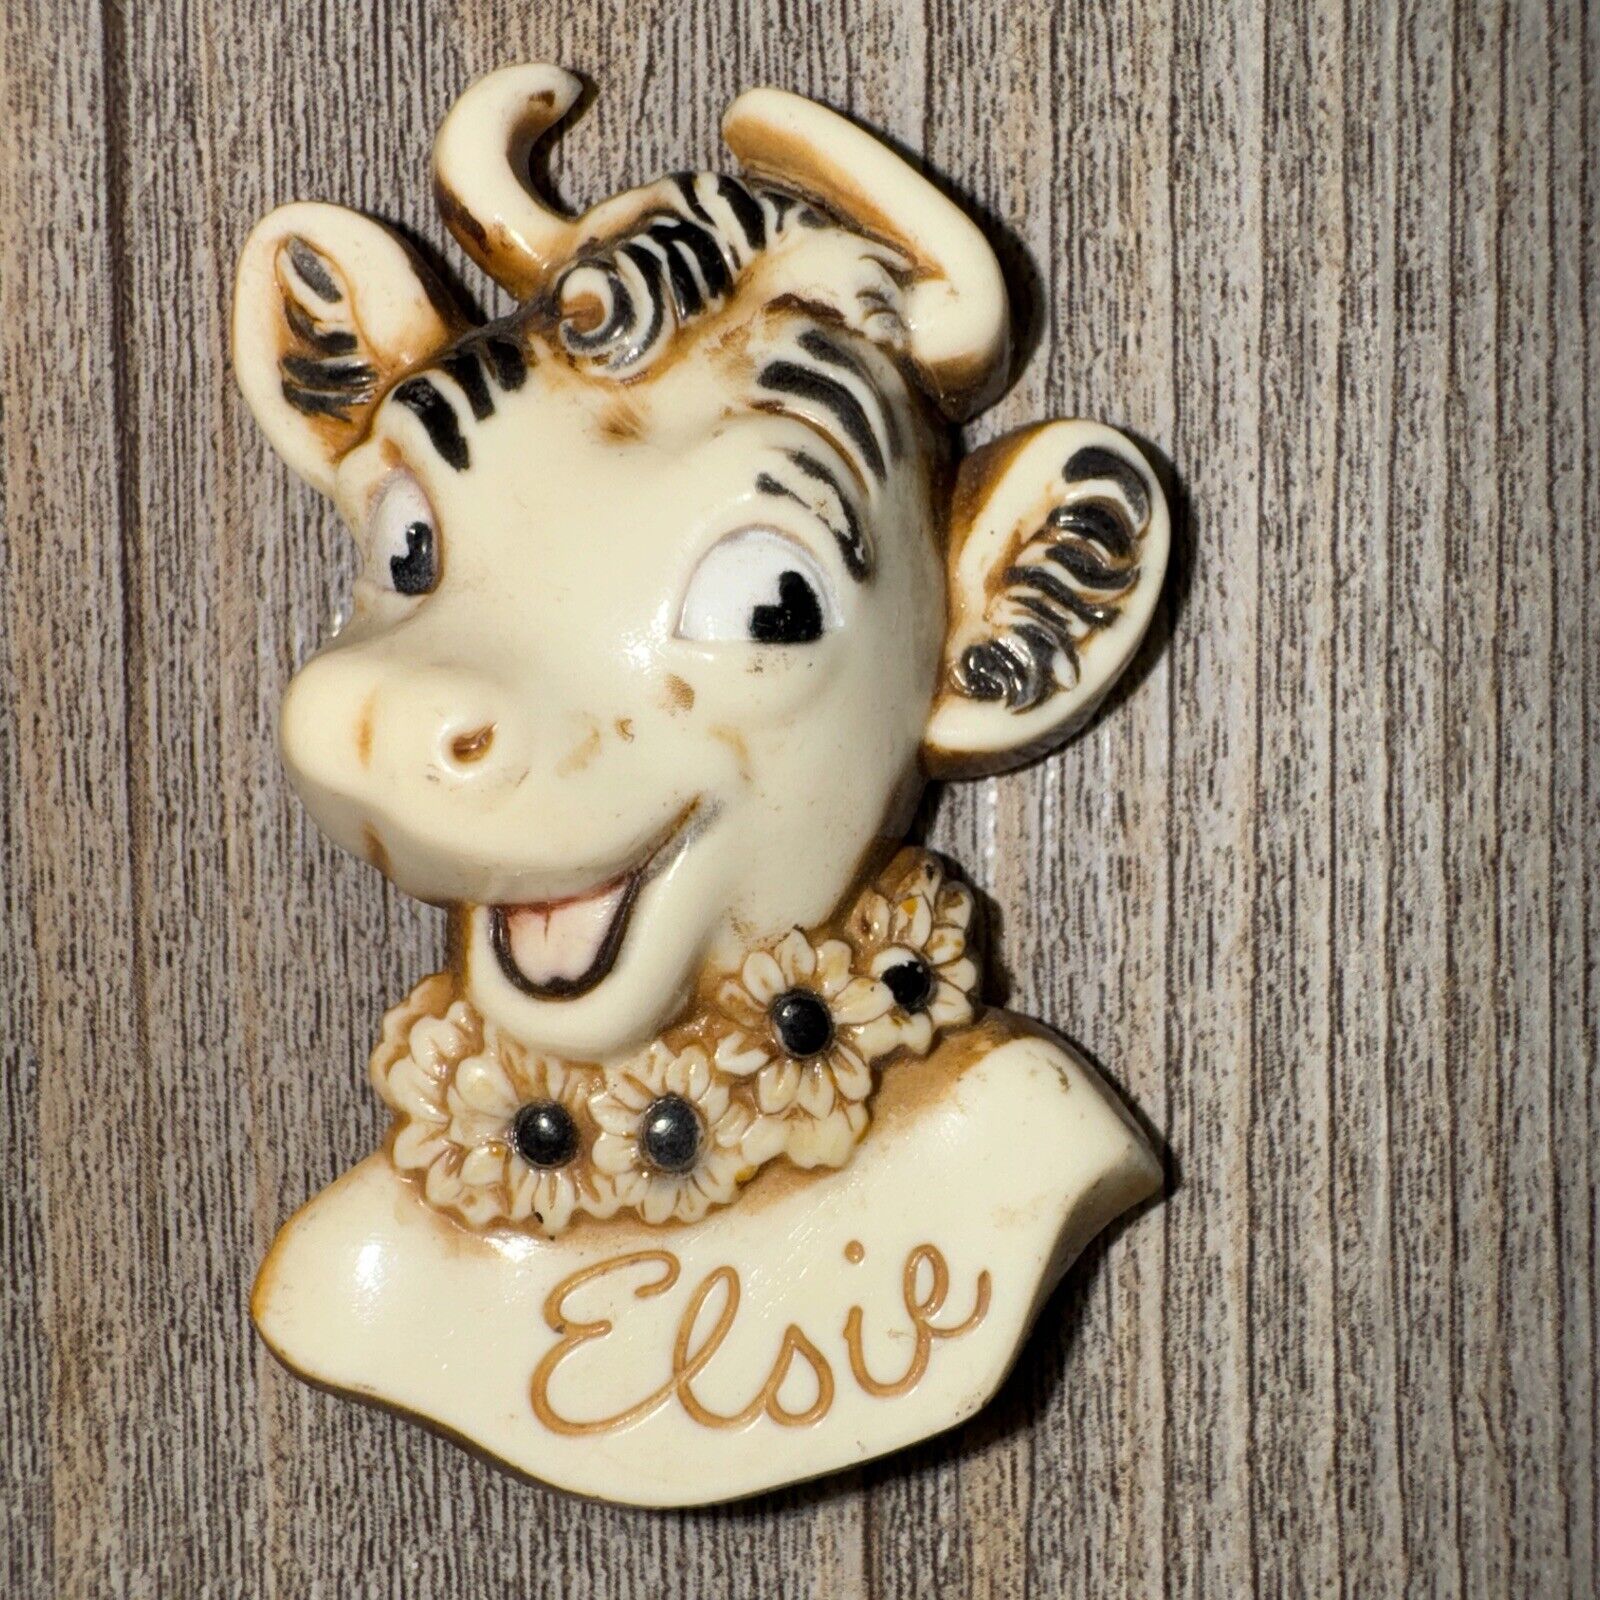 ELSIE THE COW VINTAGE CELLULOID PIN BROOCH FACE DAIRY ADVERTISING BORDEN DAIRY